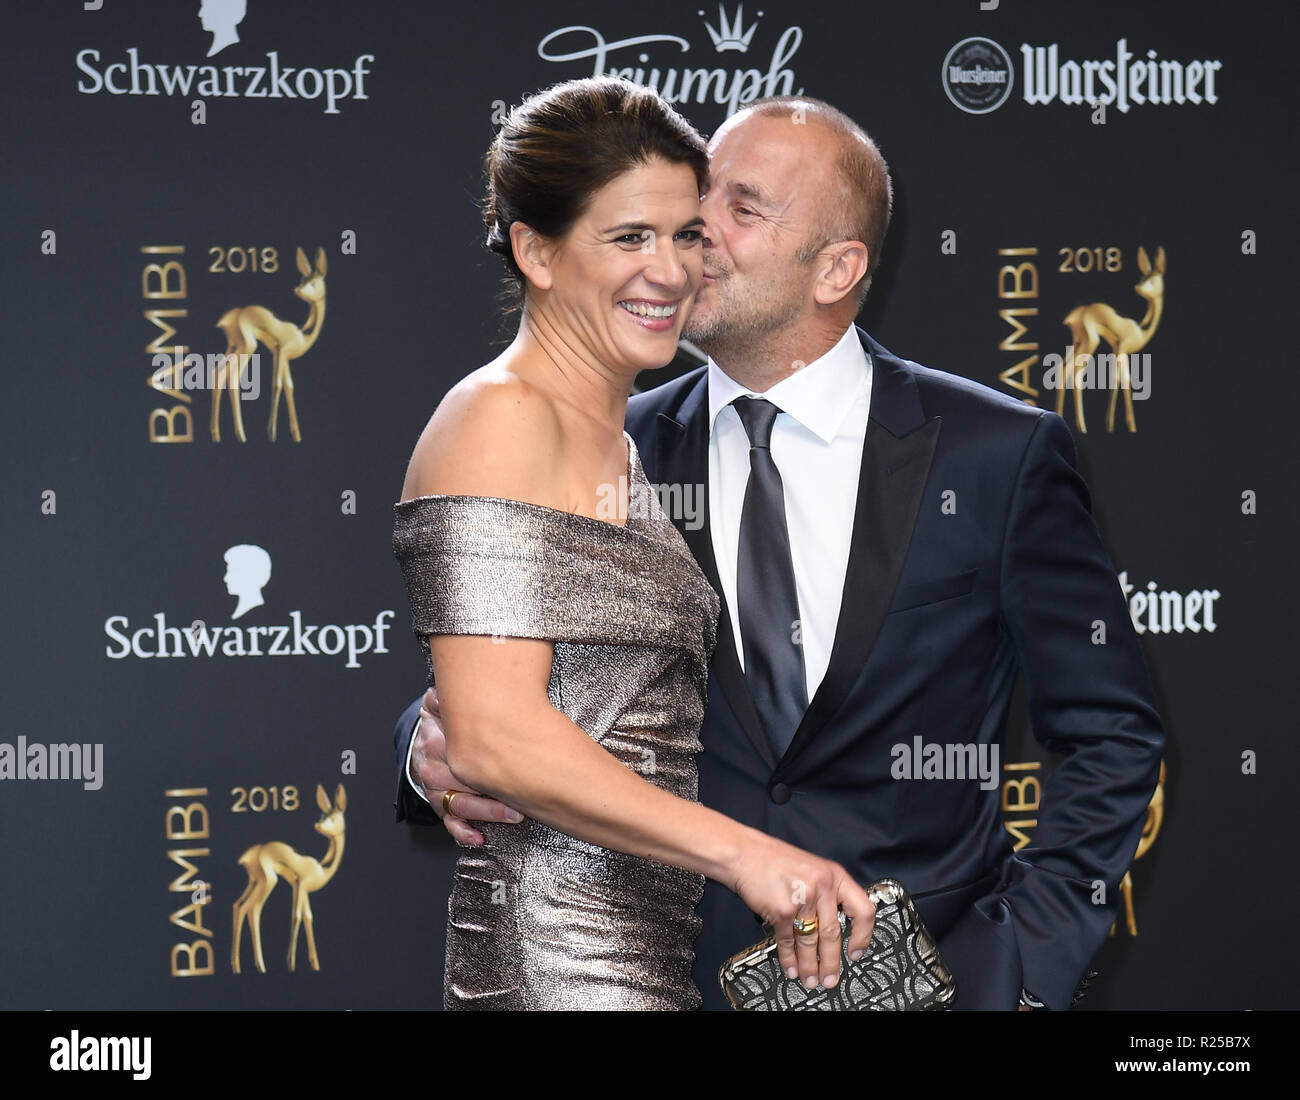 Berlin, Germany. 16th November 2018. Heino Ferch and his wife Marie-Jeanette Ferch come to the Stage Theater for the 70th Bambi Media Award. Credit: Britta Pedersen/dpa-Zentralbild/dpa/Alamy Live News Stock Photo